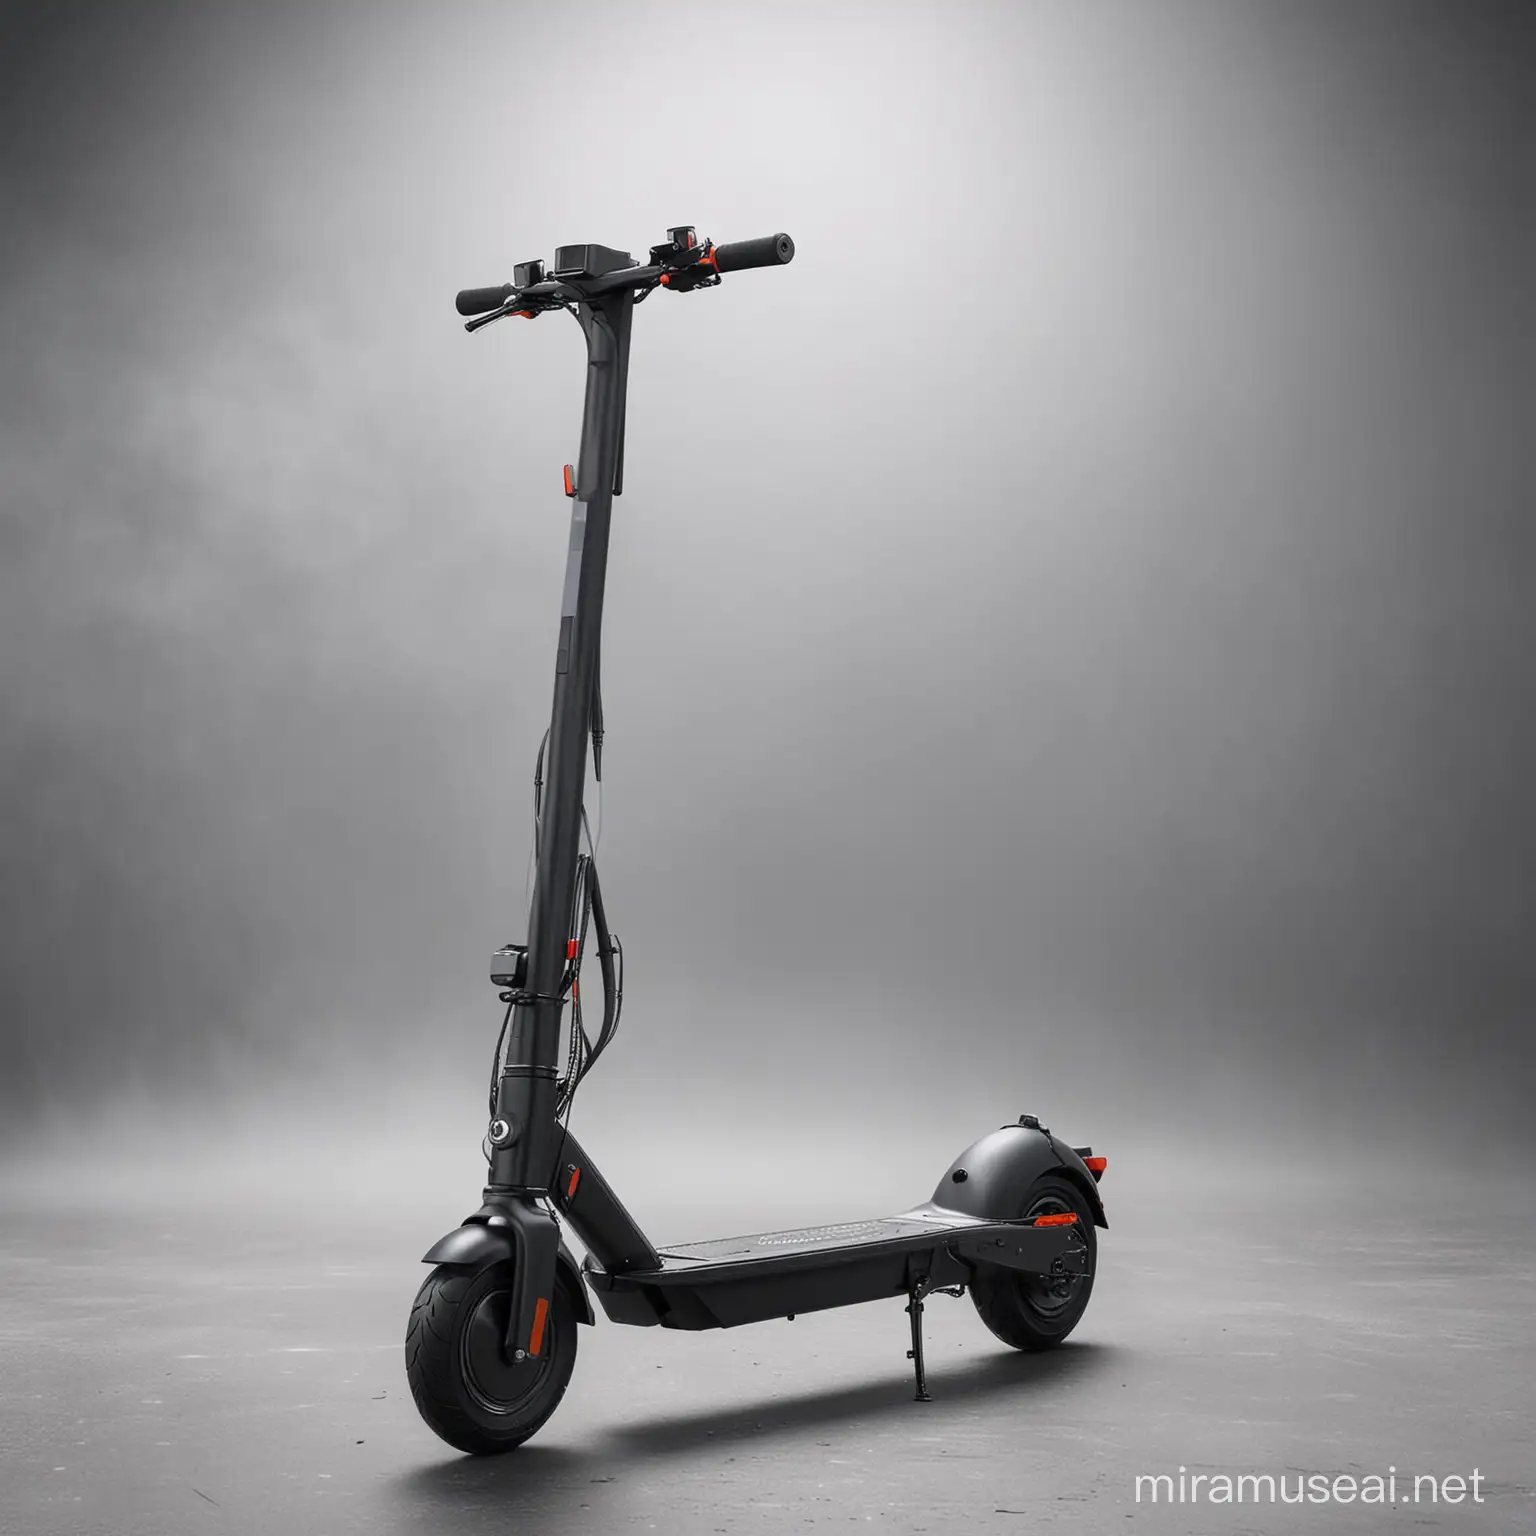 Modern Black Electric Scooter in Minimalistic Foggy Setting